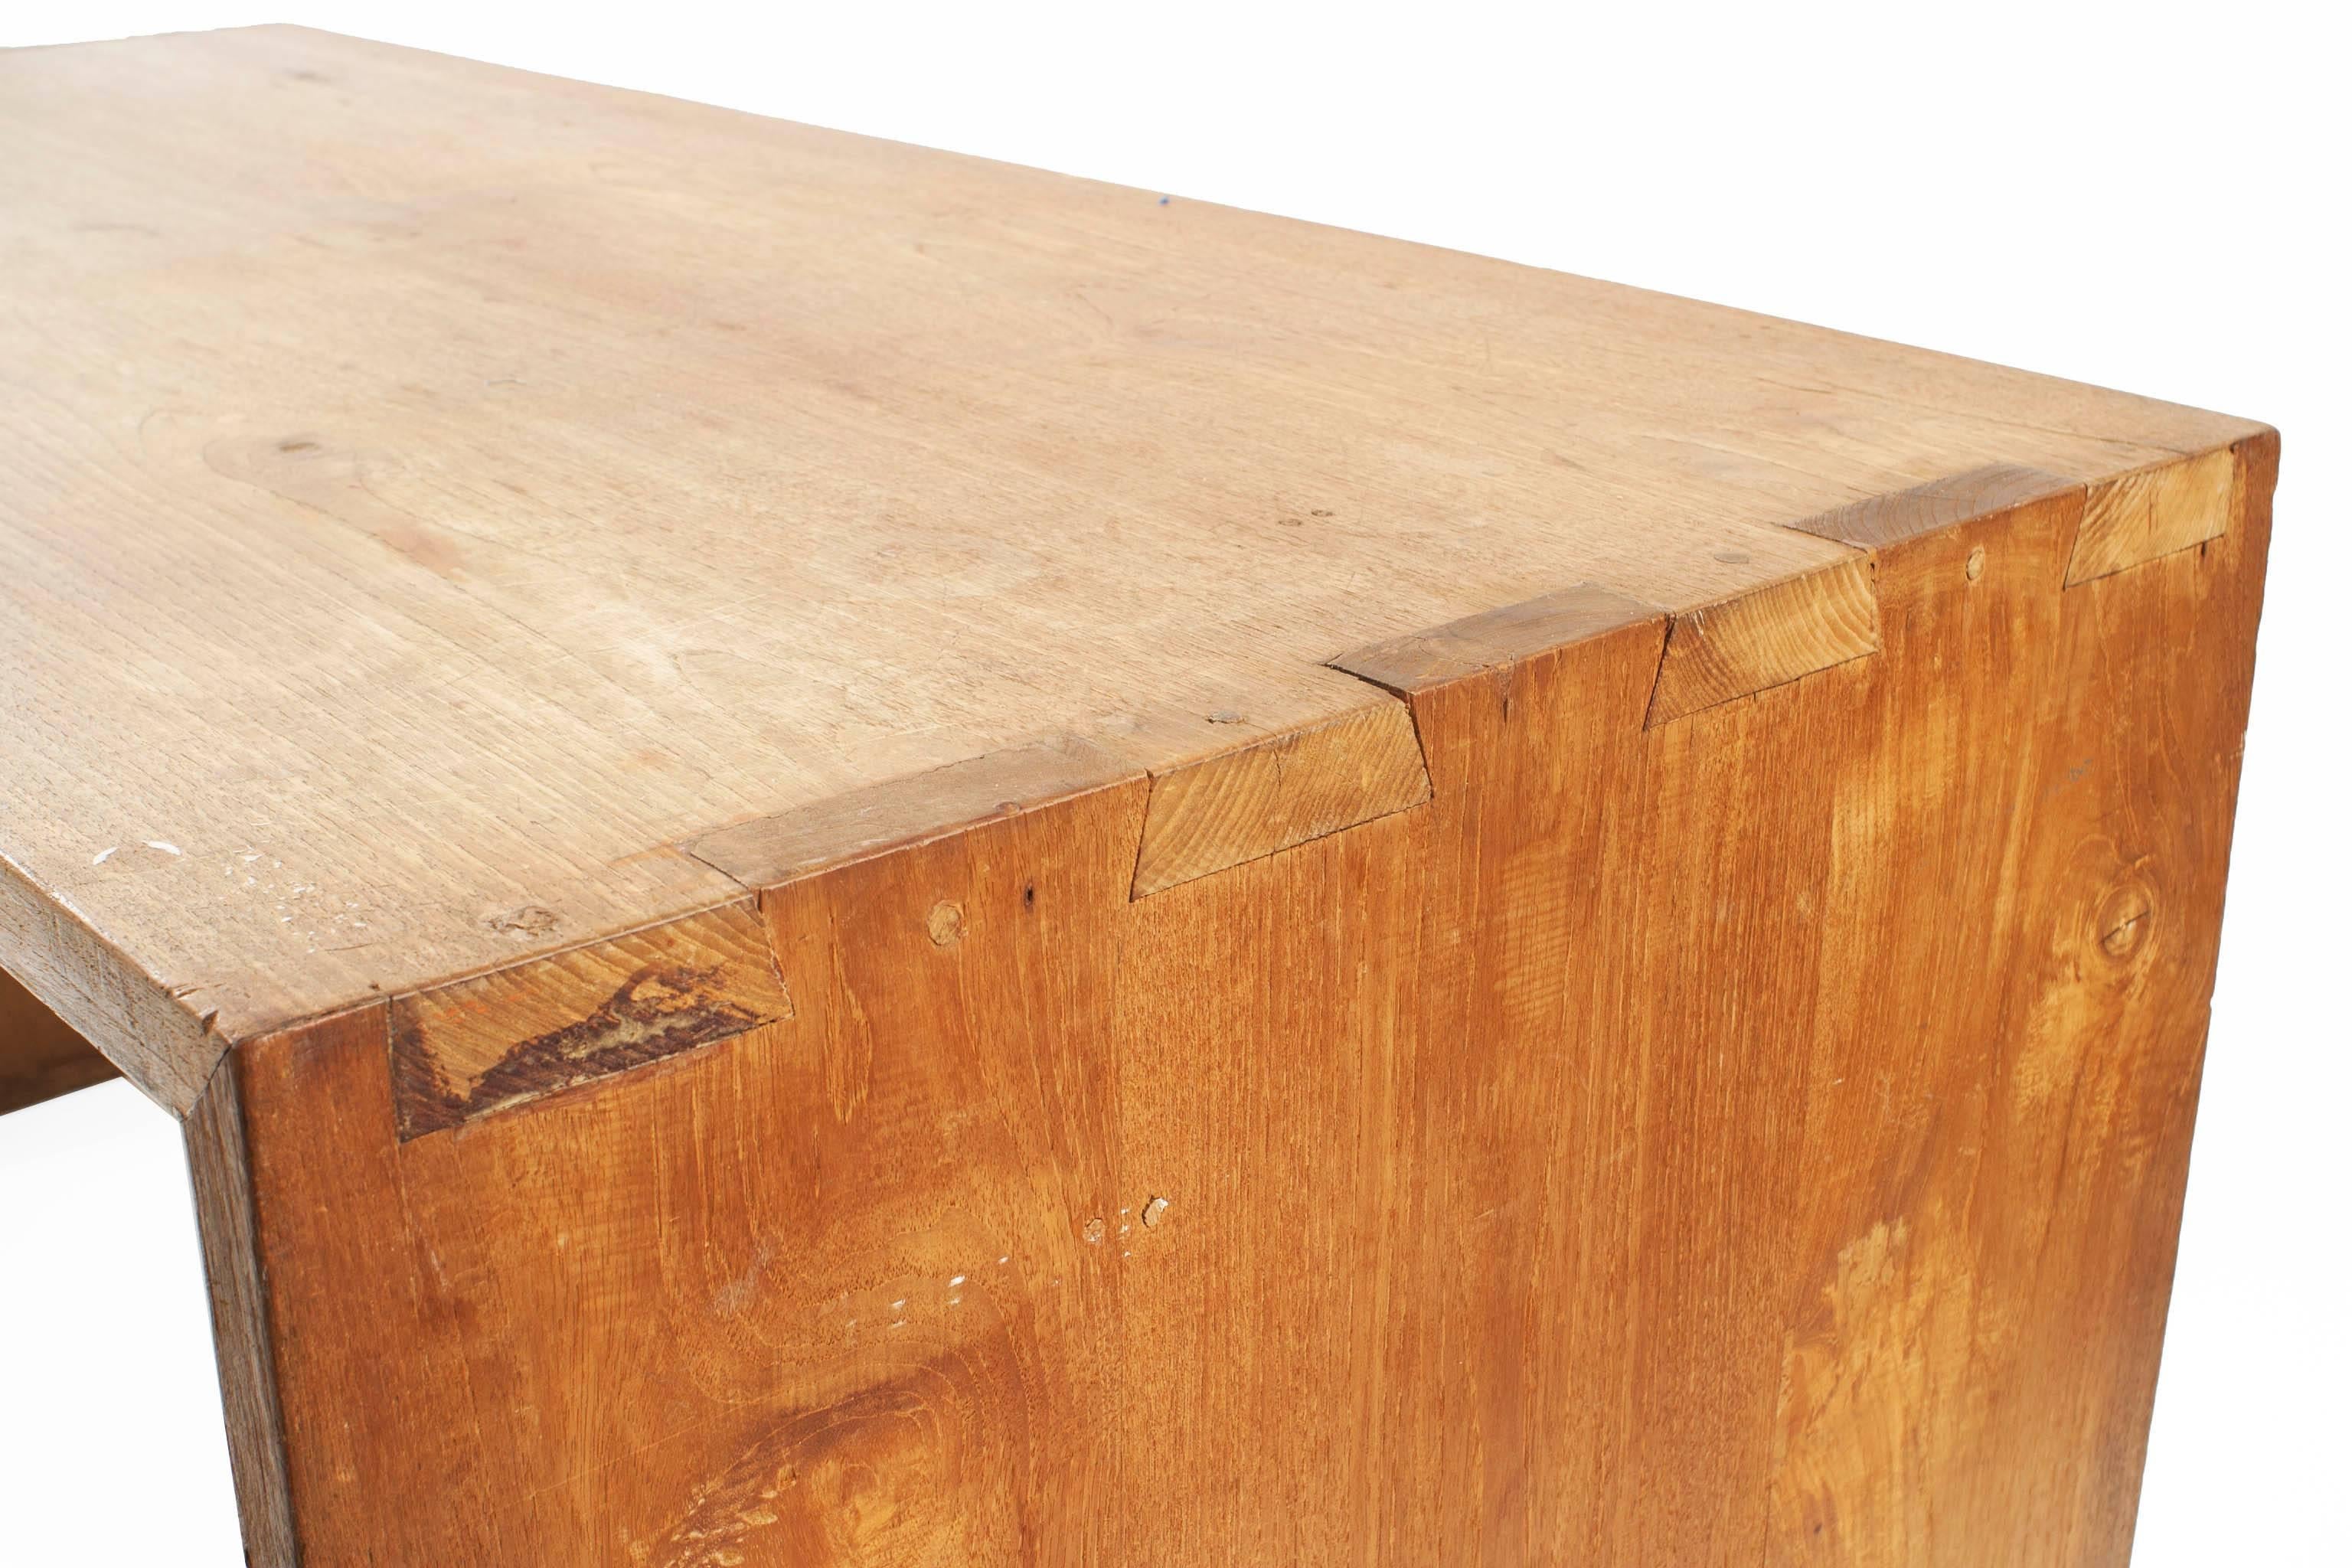 20th Century Post War Minimalist Pine Table Desk with Exposed Dovetails